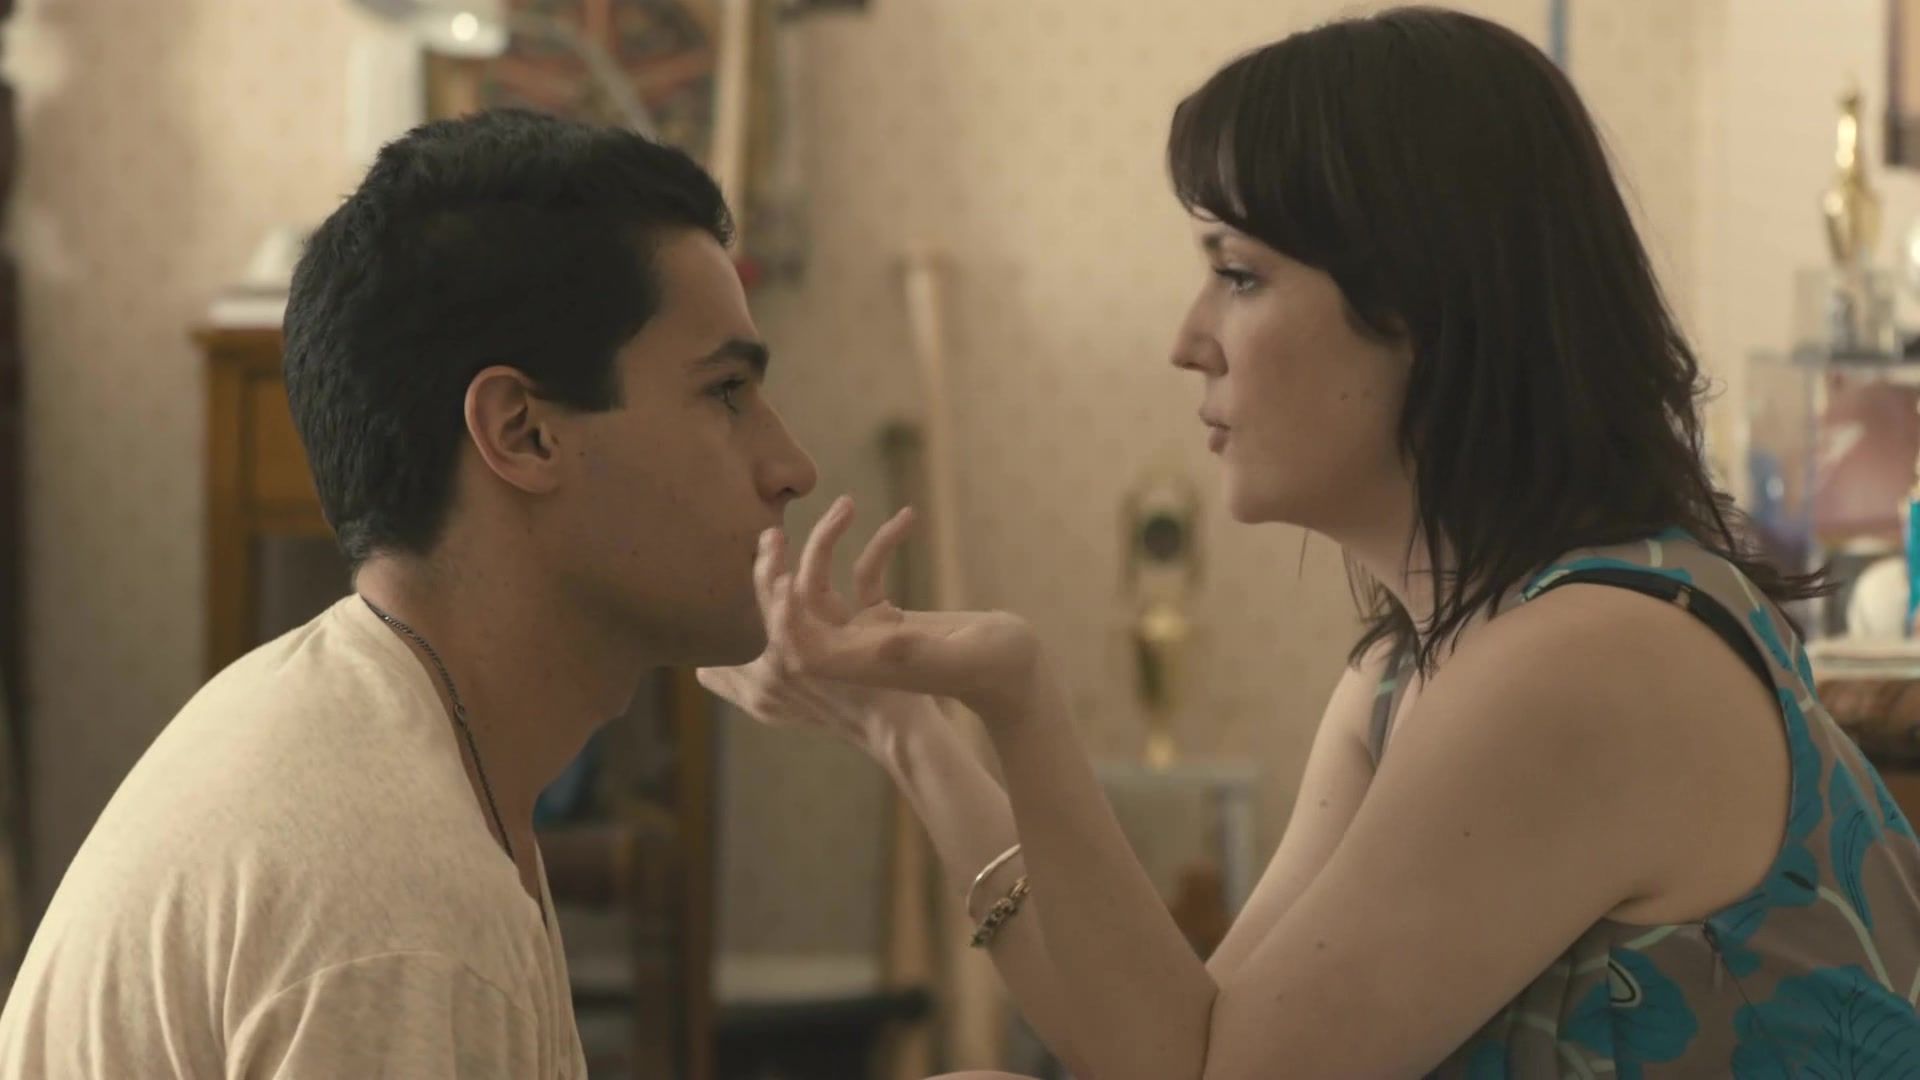 Tit Melanie Lynskey - Hello I Must Be Going (2012) (Sex, Nude) iWantClips - 2